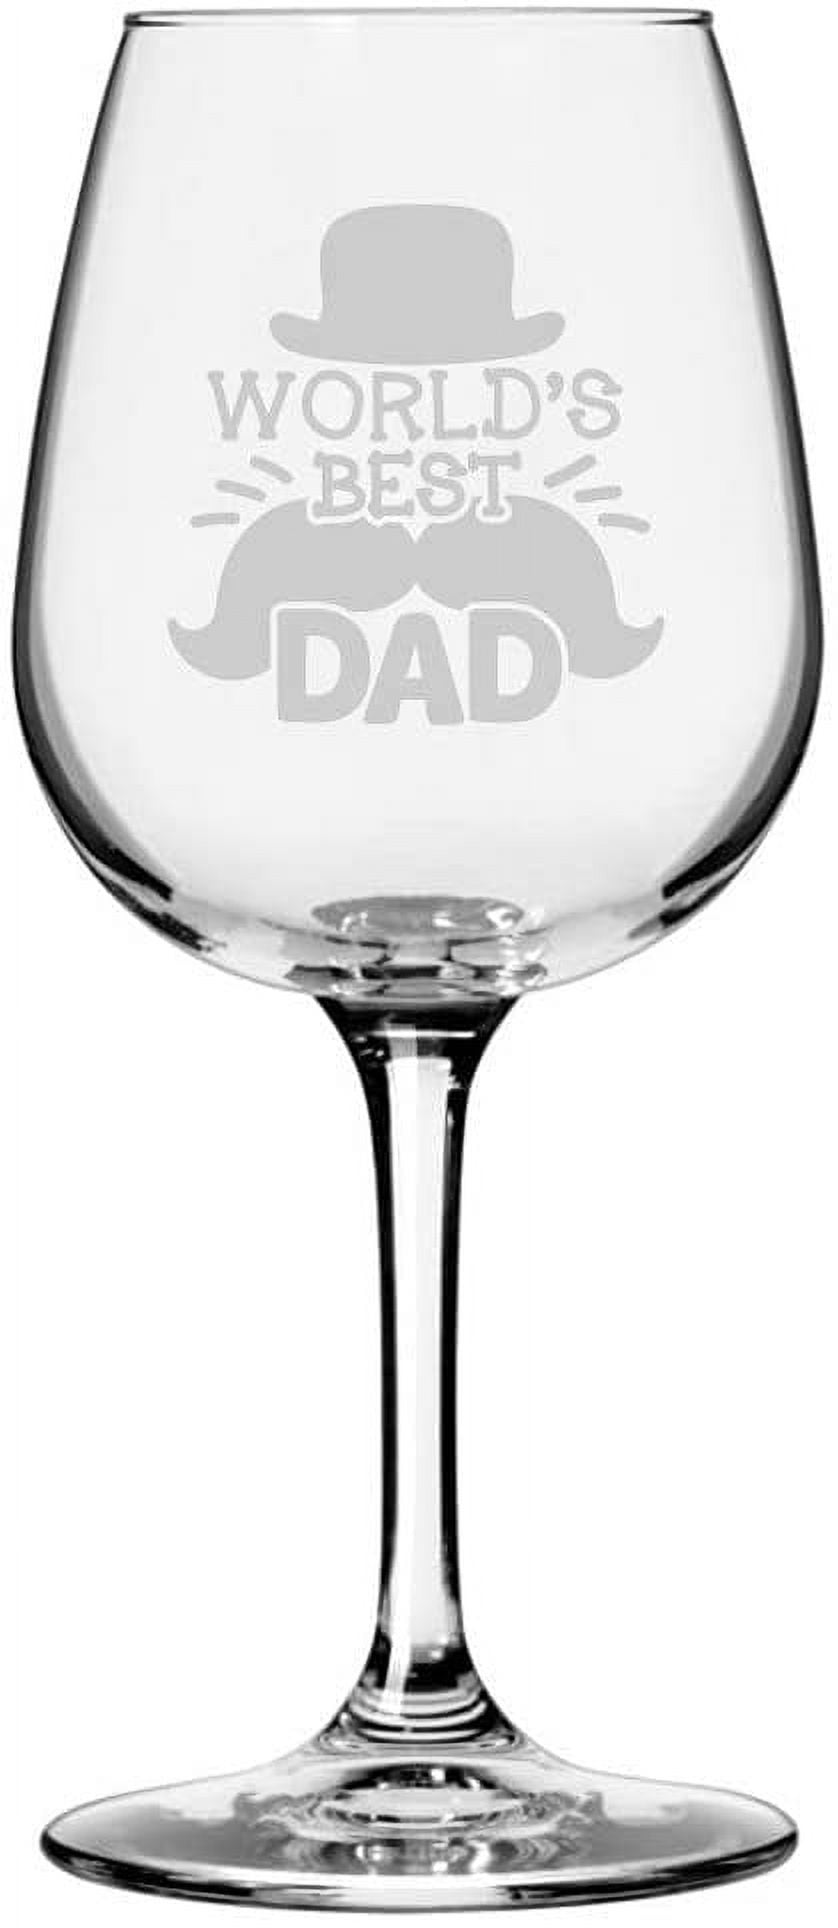 Etched Pint Glass - Best Dad in the Galaxy - Everything Etched